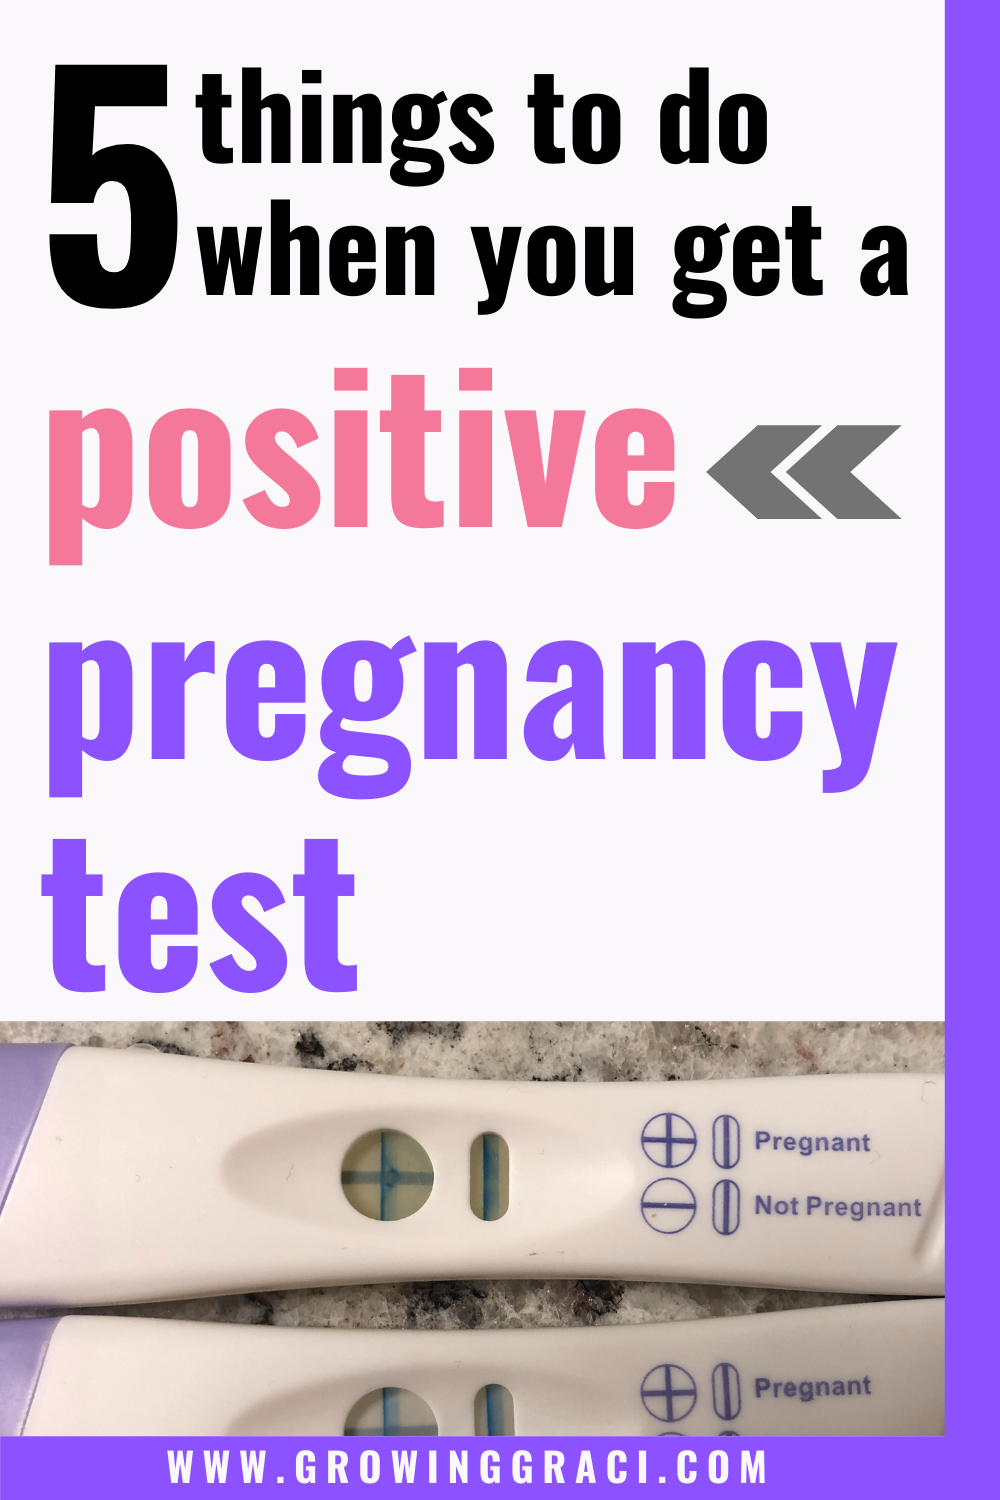 5 Things To Do When You Find Out You’re Pregnant - Growing Graci